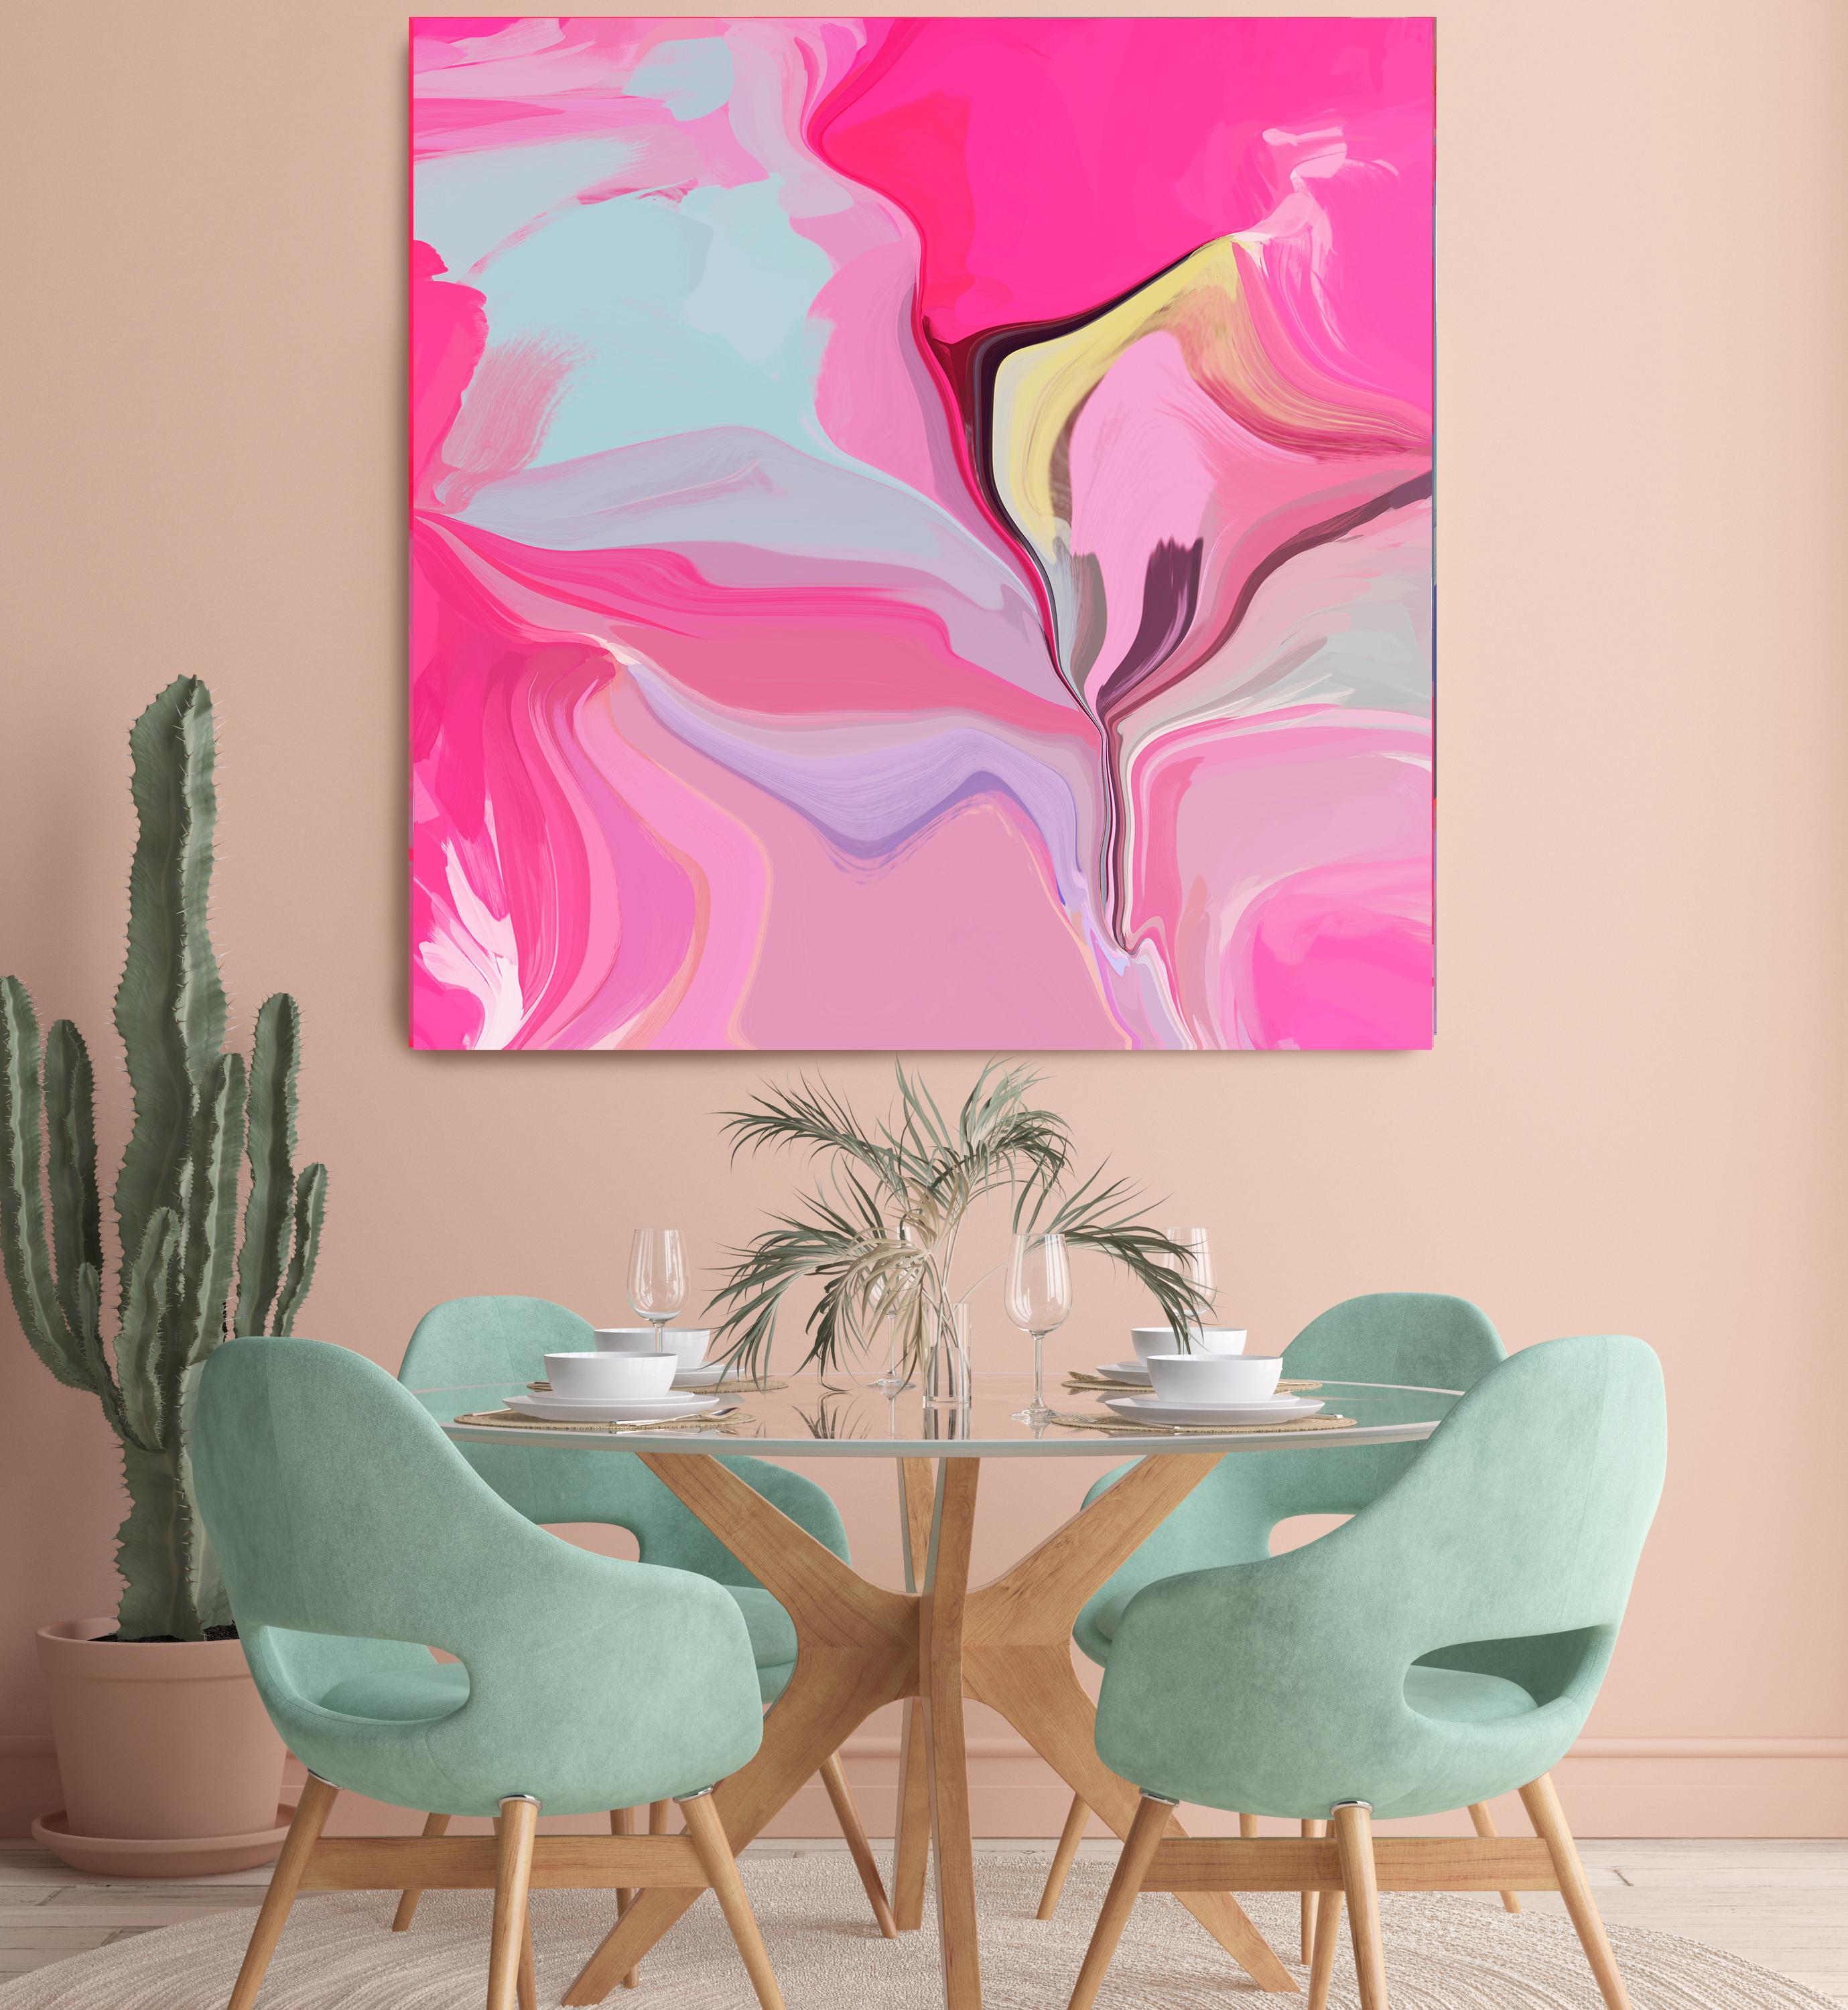 Abstract Hot Pink Painting Mixed Media on Canvas 45x45" Abstract No.13